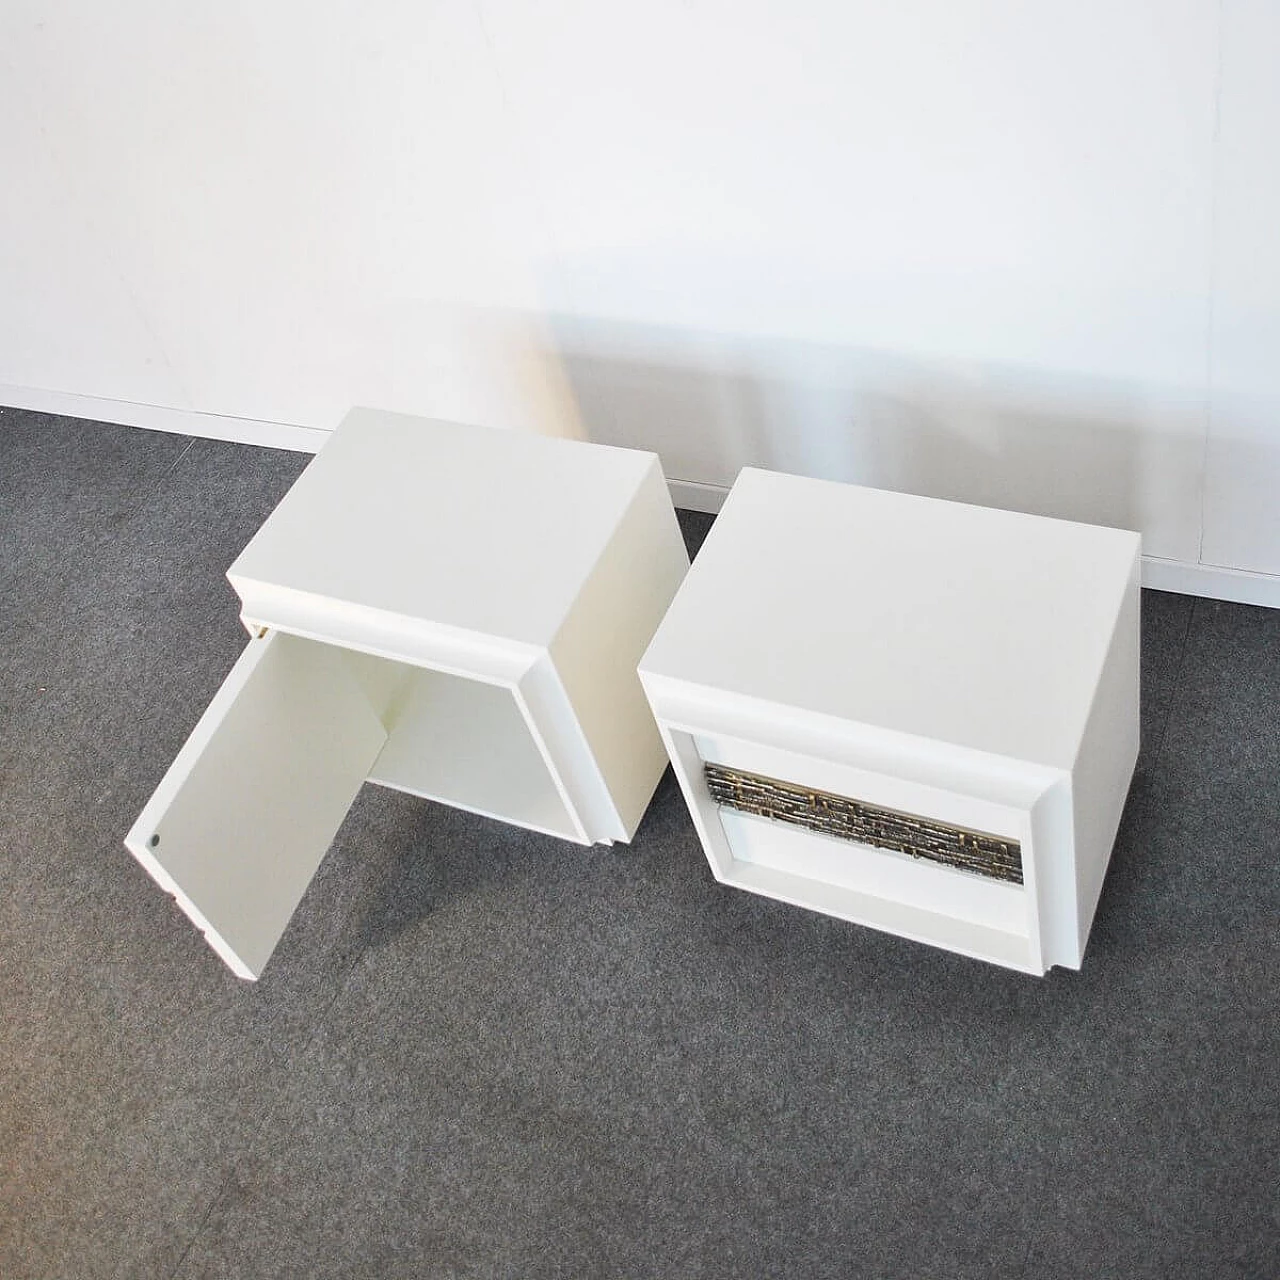 Pair of white lacquered wooden bedside tables by Luciano Frigerio, 1970s 1381602